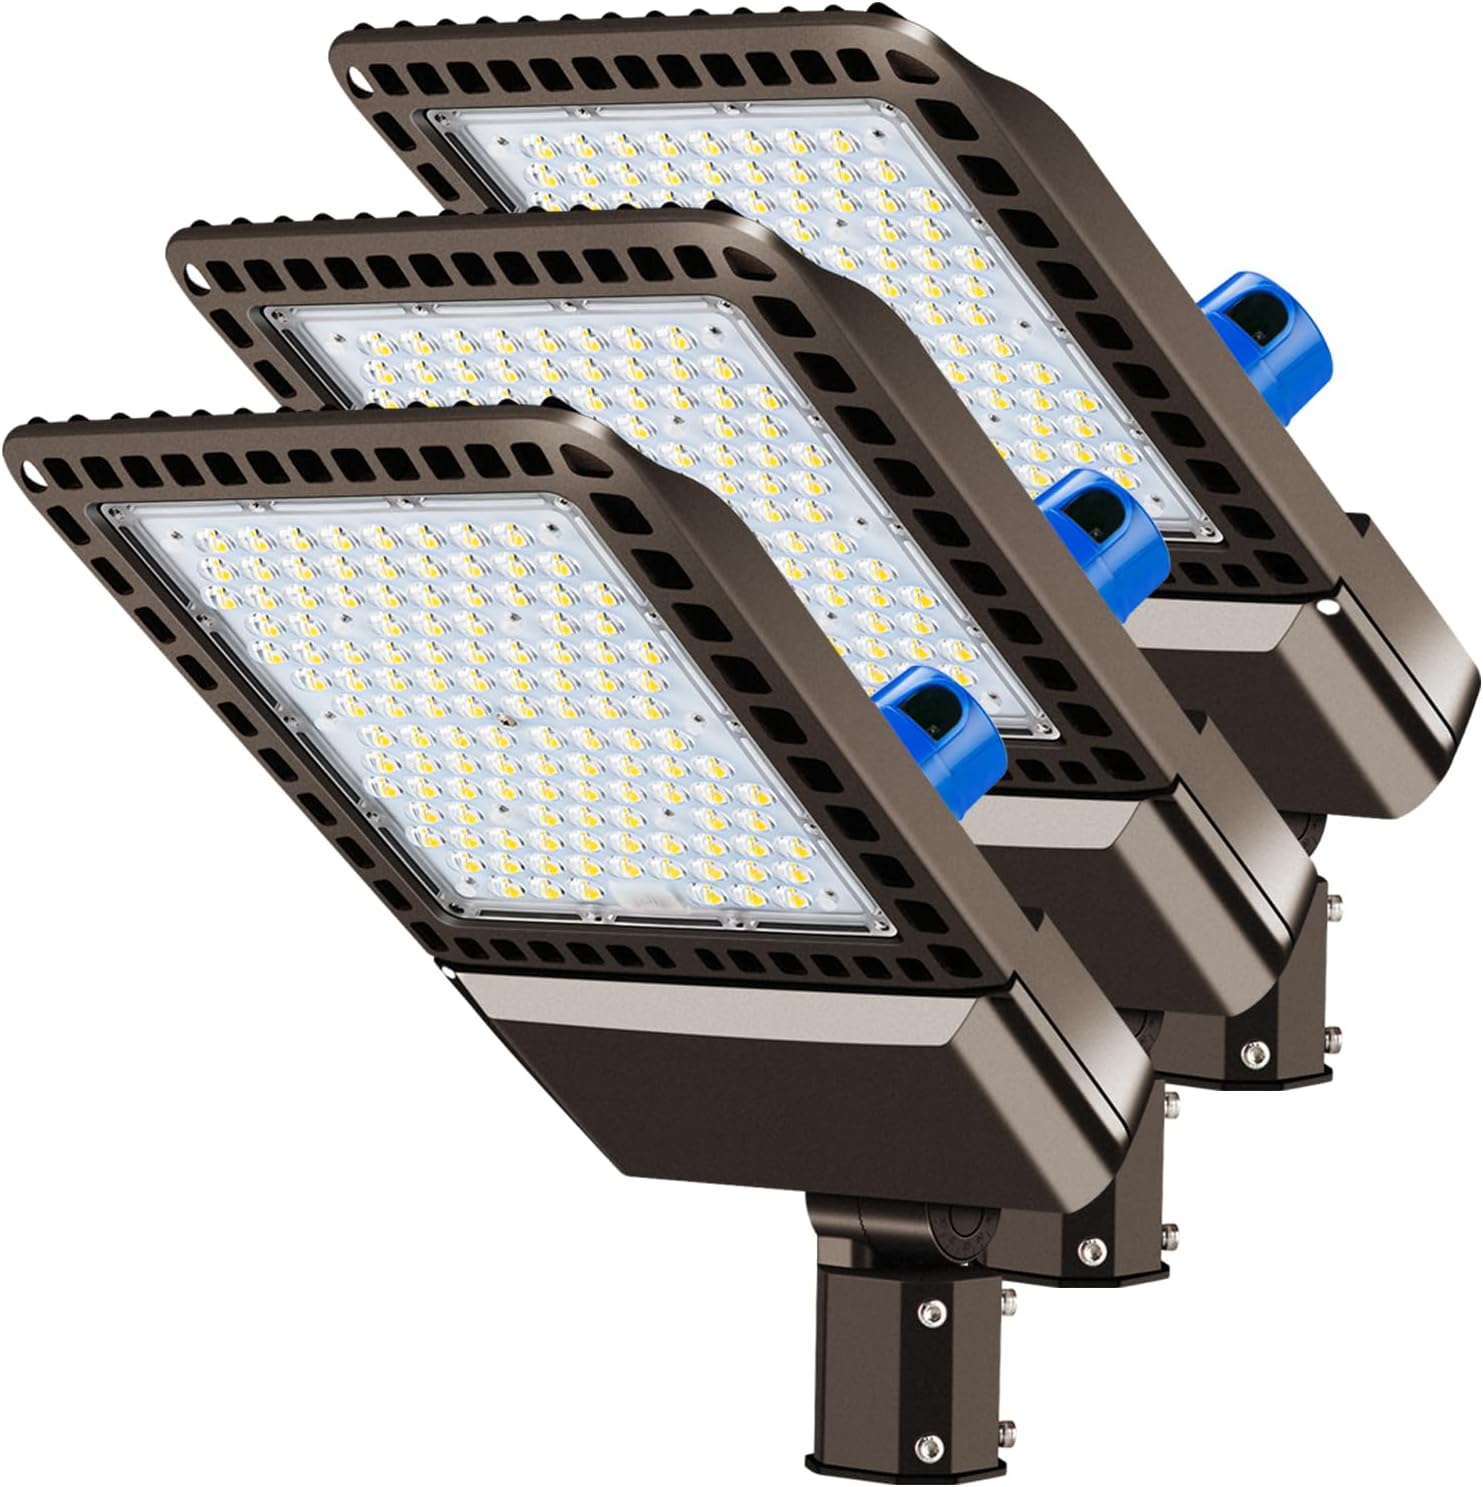 Illuminate Your Outdoor Space with Juyace 300W LED Parking Lot Lights